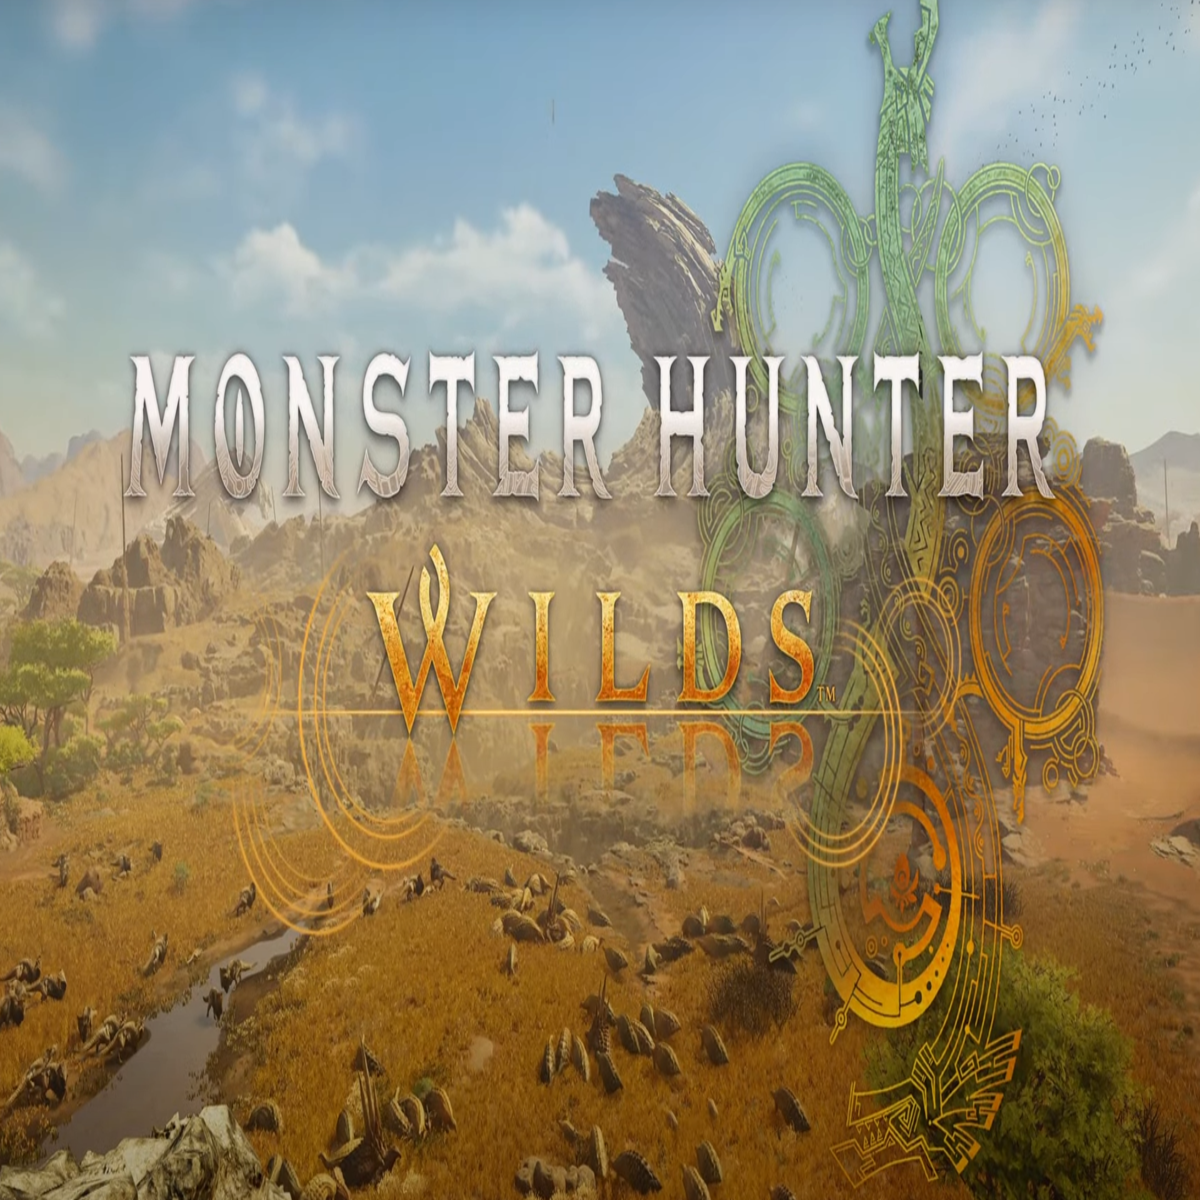 Monster Hunter Wilds is basically World 2, and it comes out in